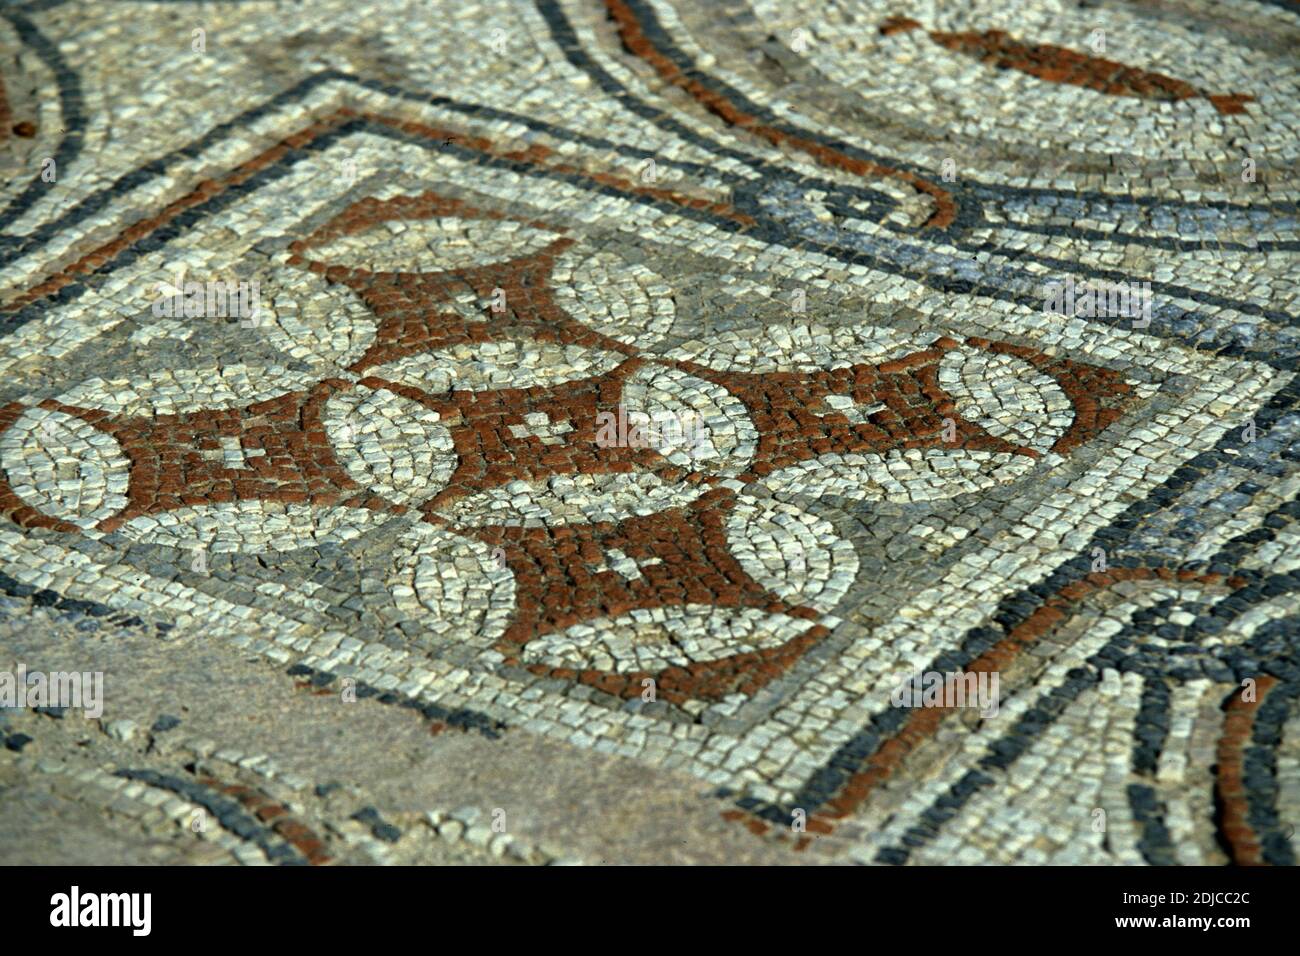 the Mosaic at the Roman Ruins of Kourion near the Town of Episkopi in the south of Cyprus.  Cyprus, Kourion, November, 2001 Stock Photo